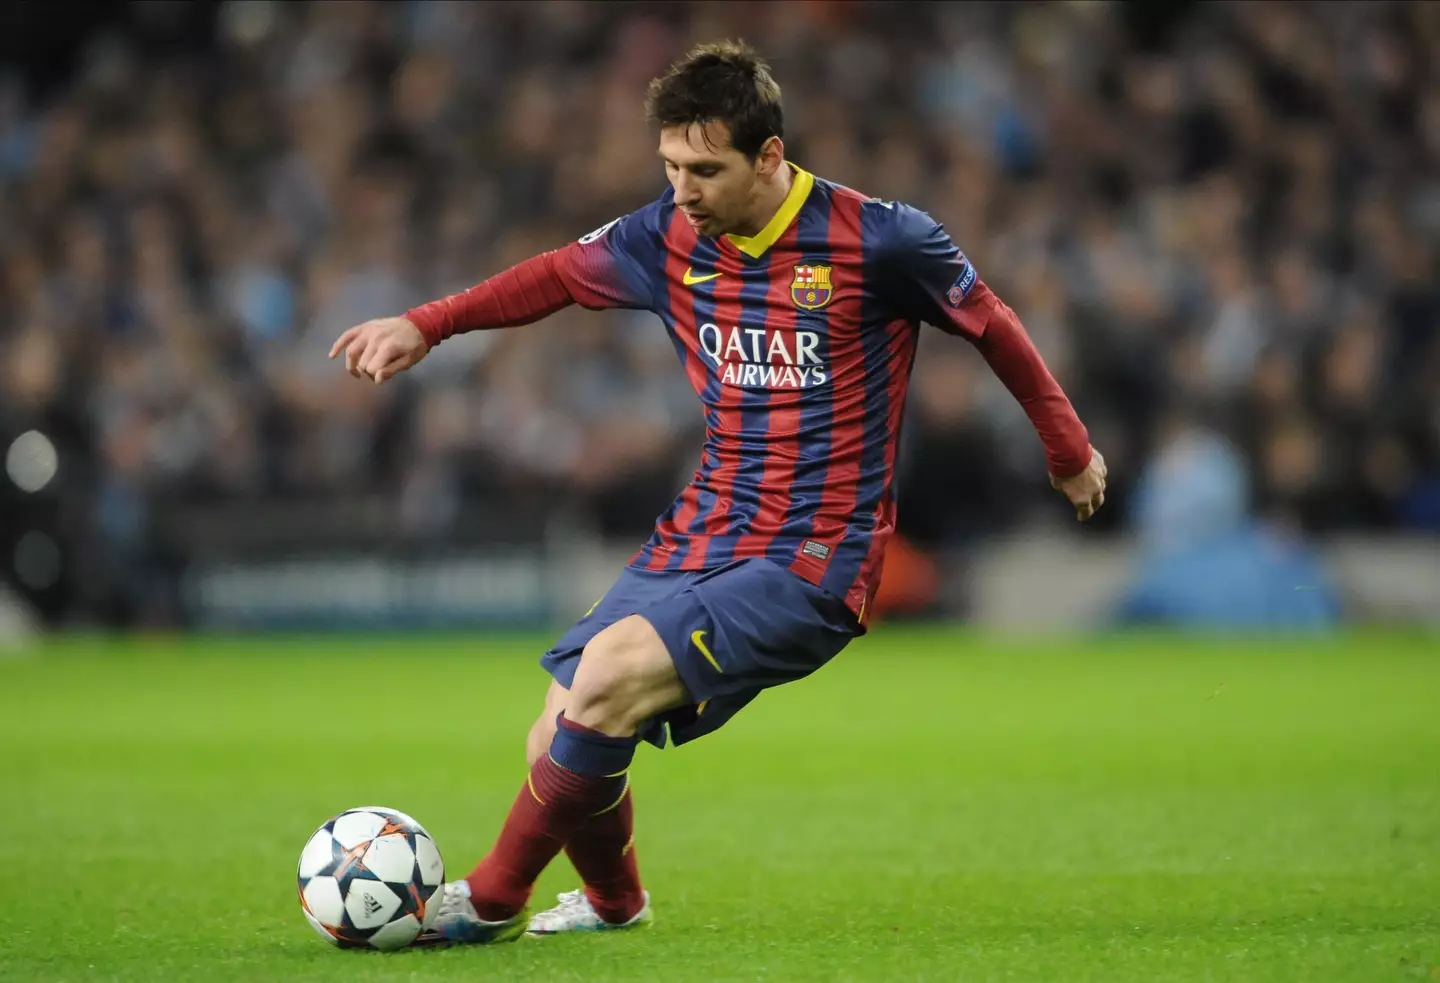 The deal collapsed with Messi unwilling to leave Barcelona (Image: PA)